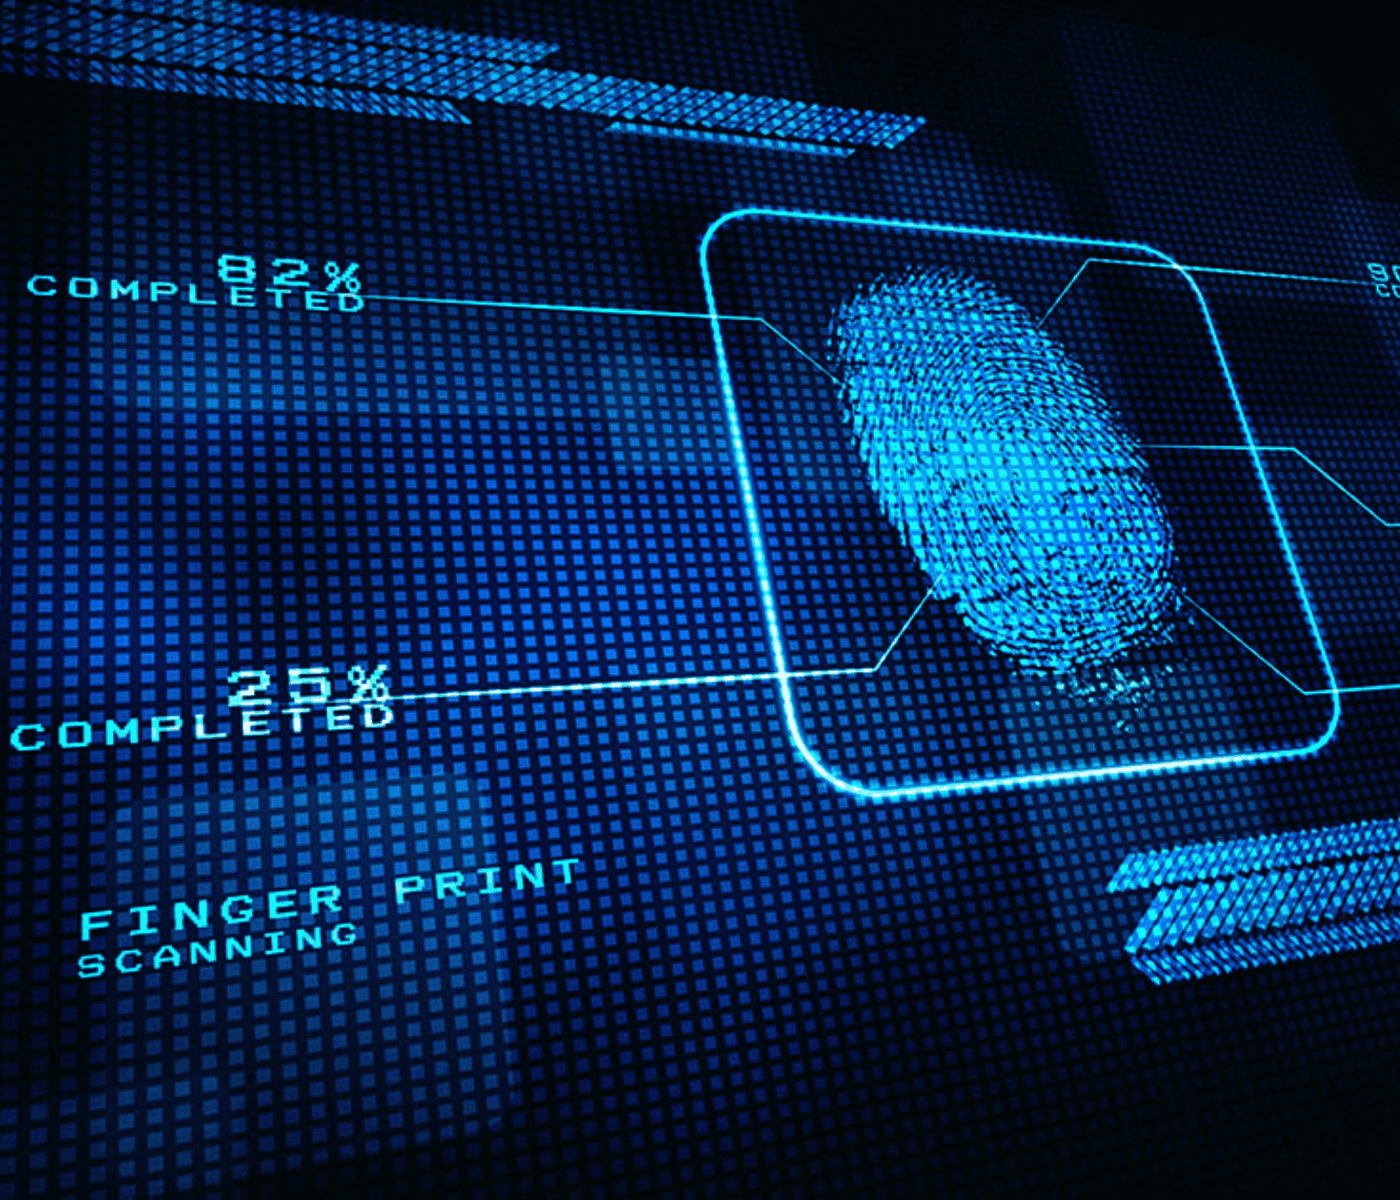 Browser Fingerprinting: What Is It & How Does It Track You?